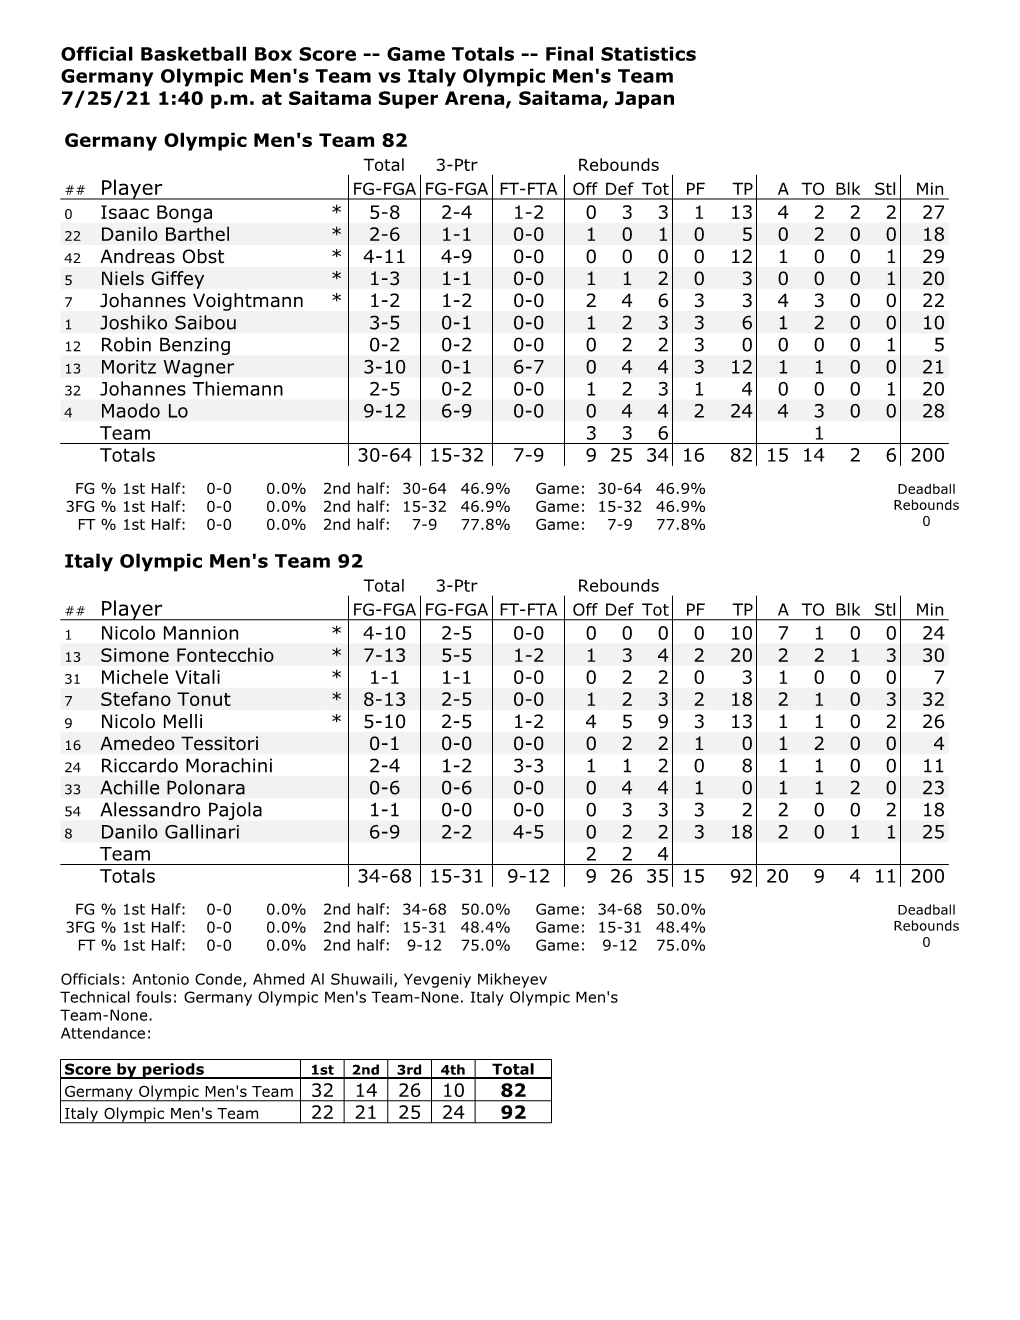 Box Score -- Game Totals -- Final Statistics Germany Olympic Men's Team Vs Italy Olympic Men's Team 7/25/21 1:40 P.M